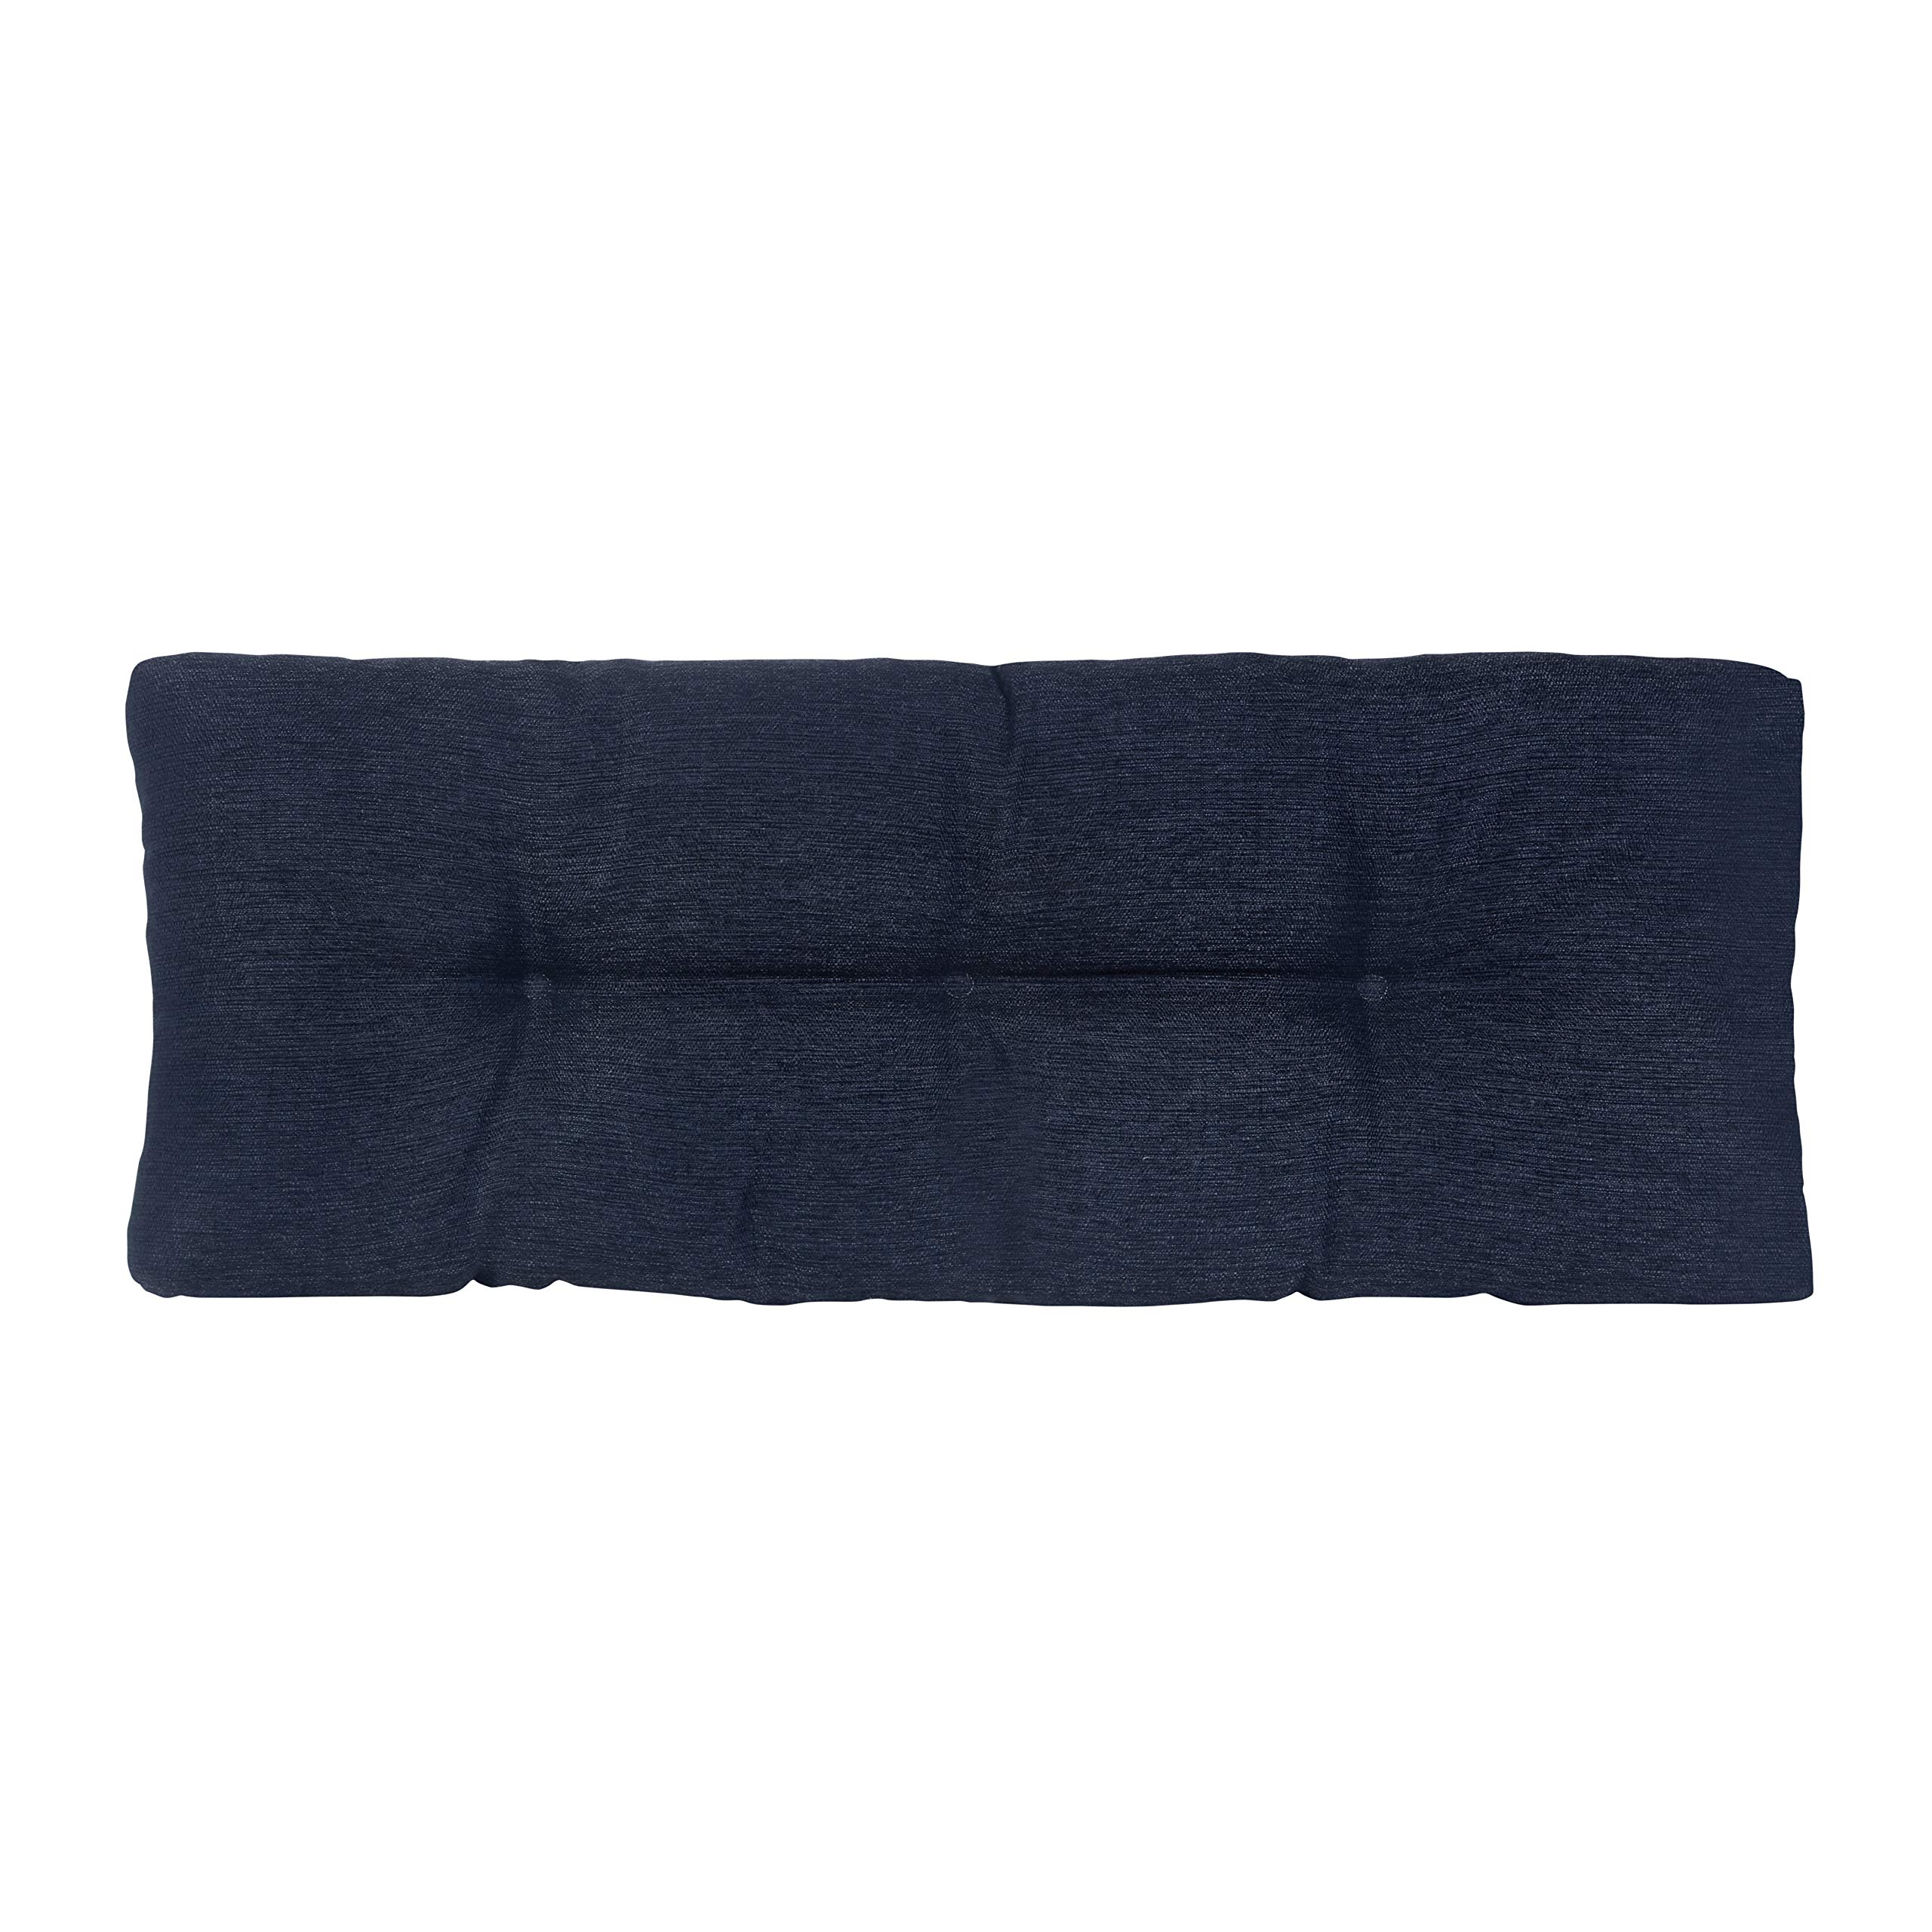 Klear Vu The Gripper Omega Non-Slip Tufted Bench Cushion for Indoor Furniture, Entryway Storage, Bay Window, Corner Nook or Piano Seat, 43 Inches, 03 Indigo